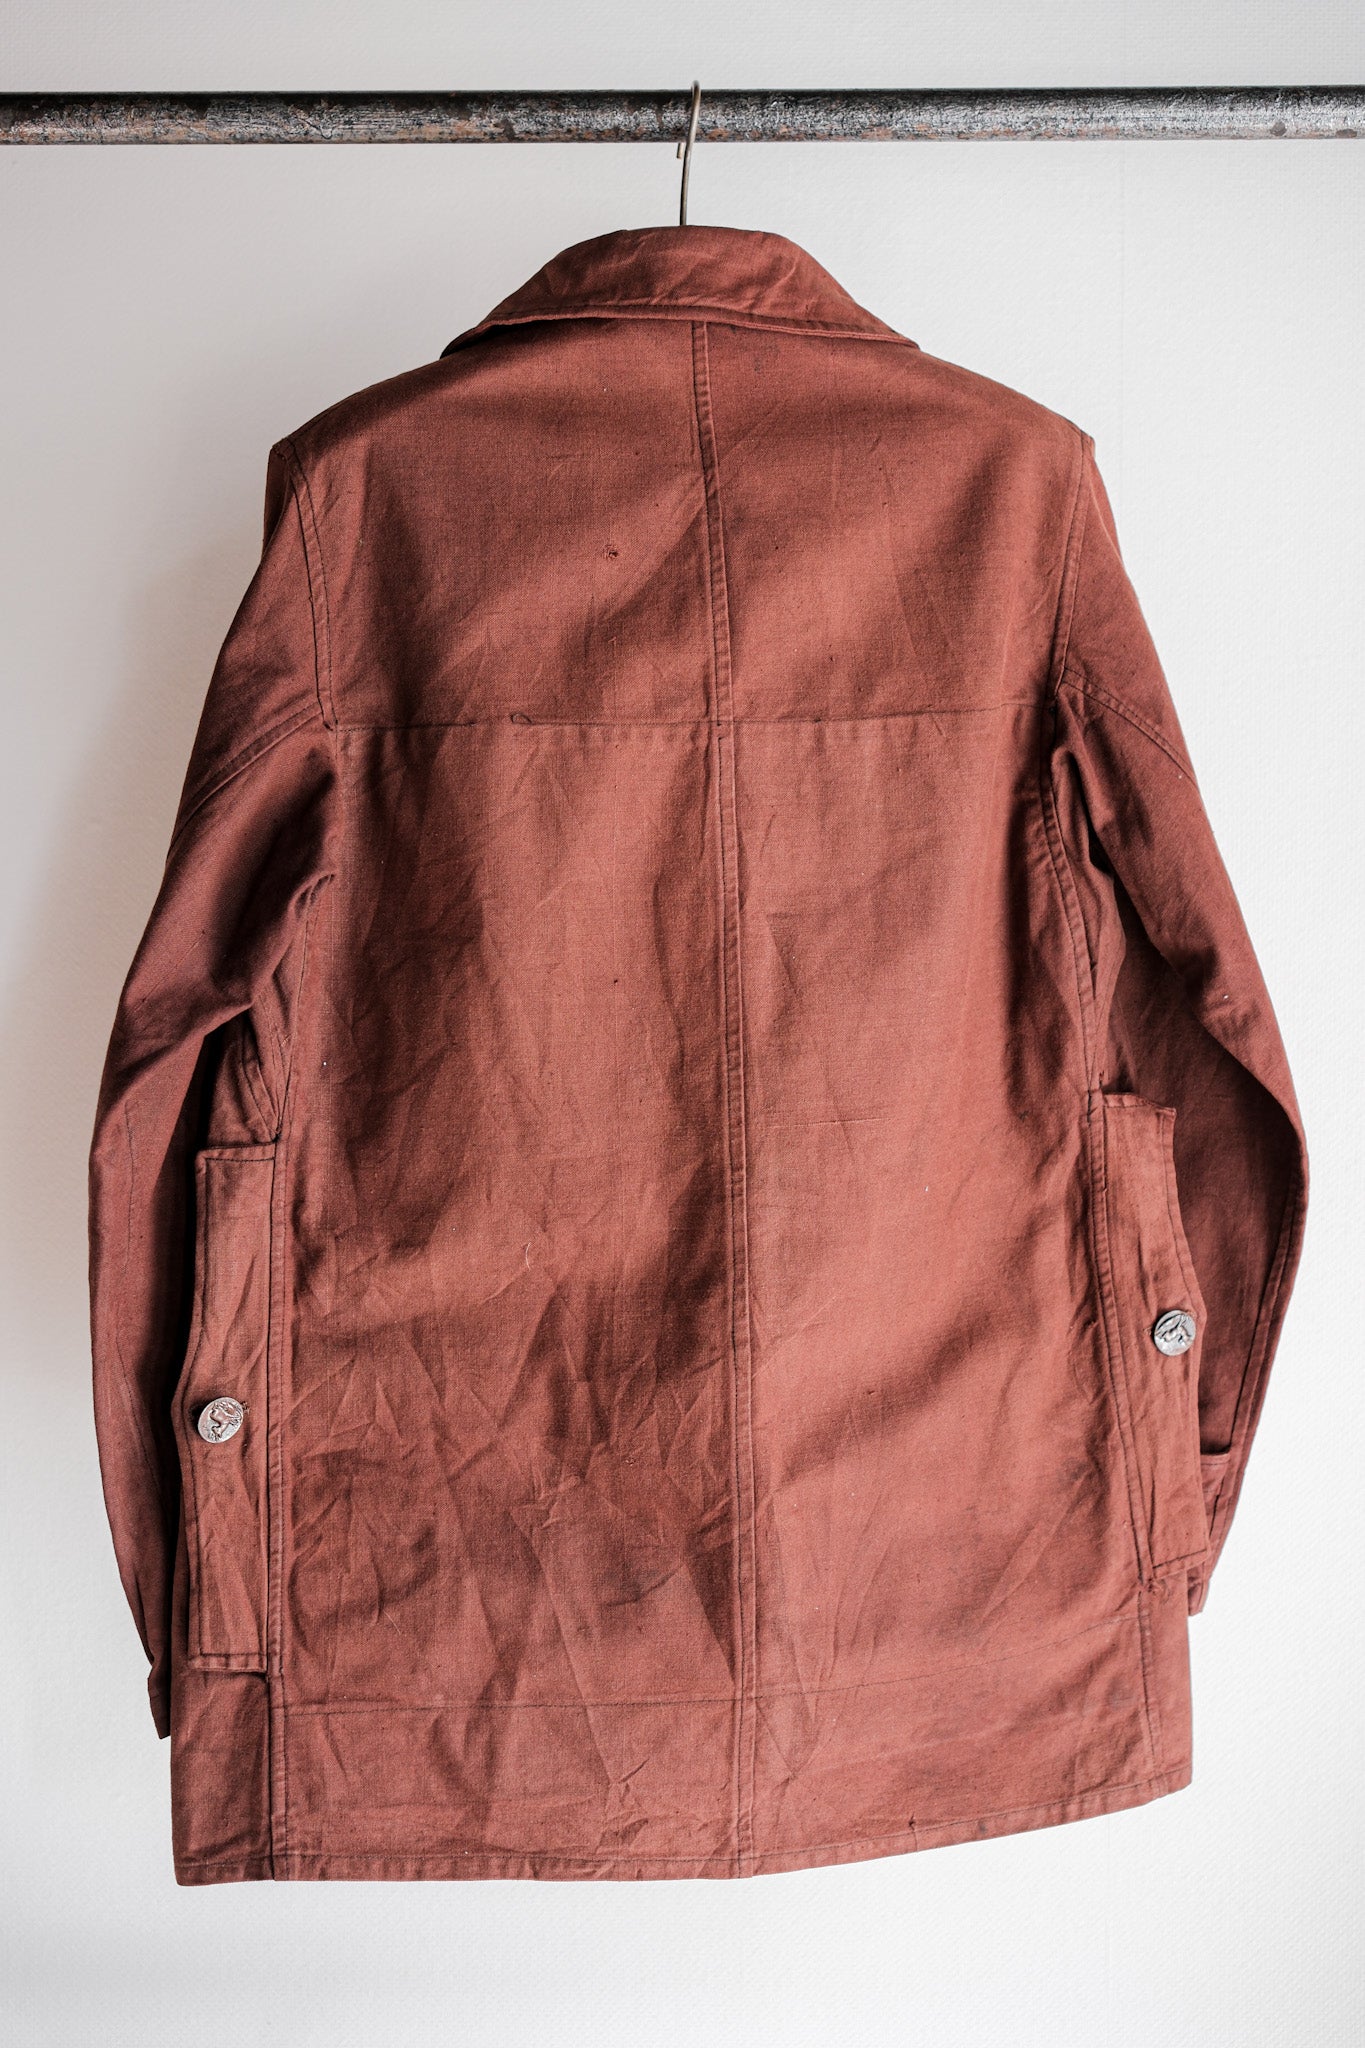 【~20's】French Vintage Reddish Brown Cotton Linen Hunting Jacket